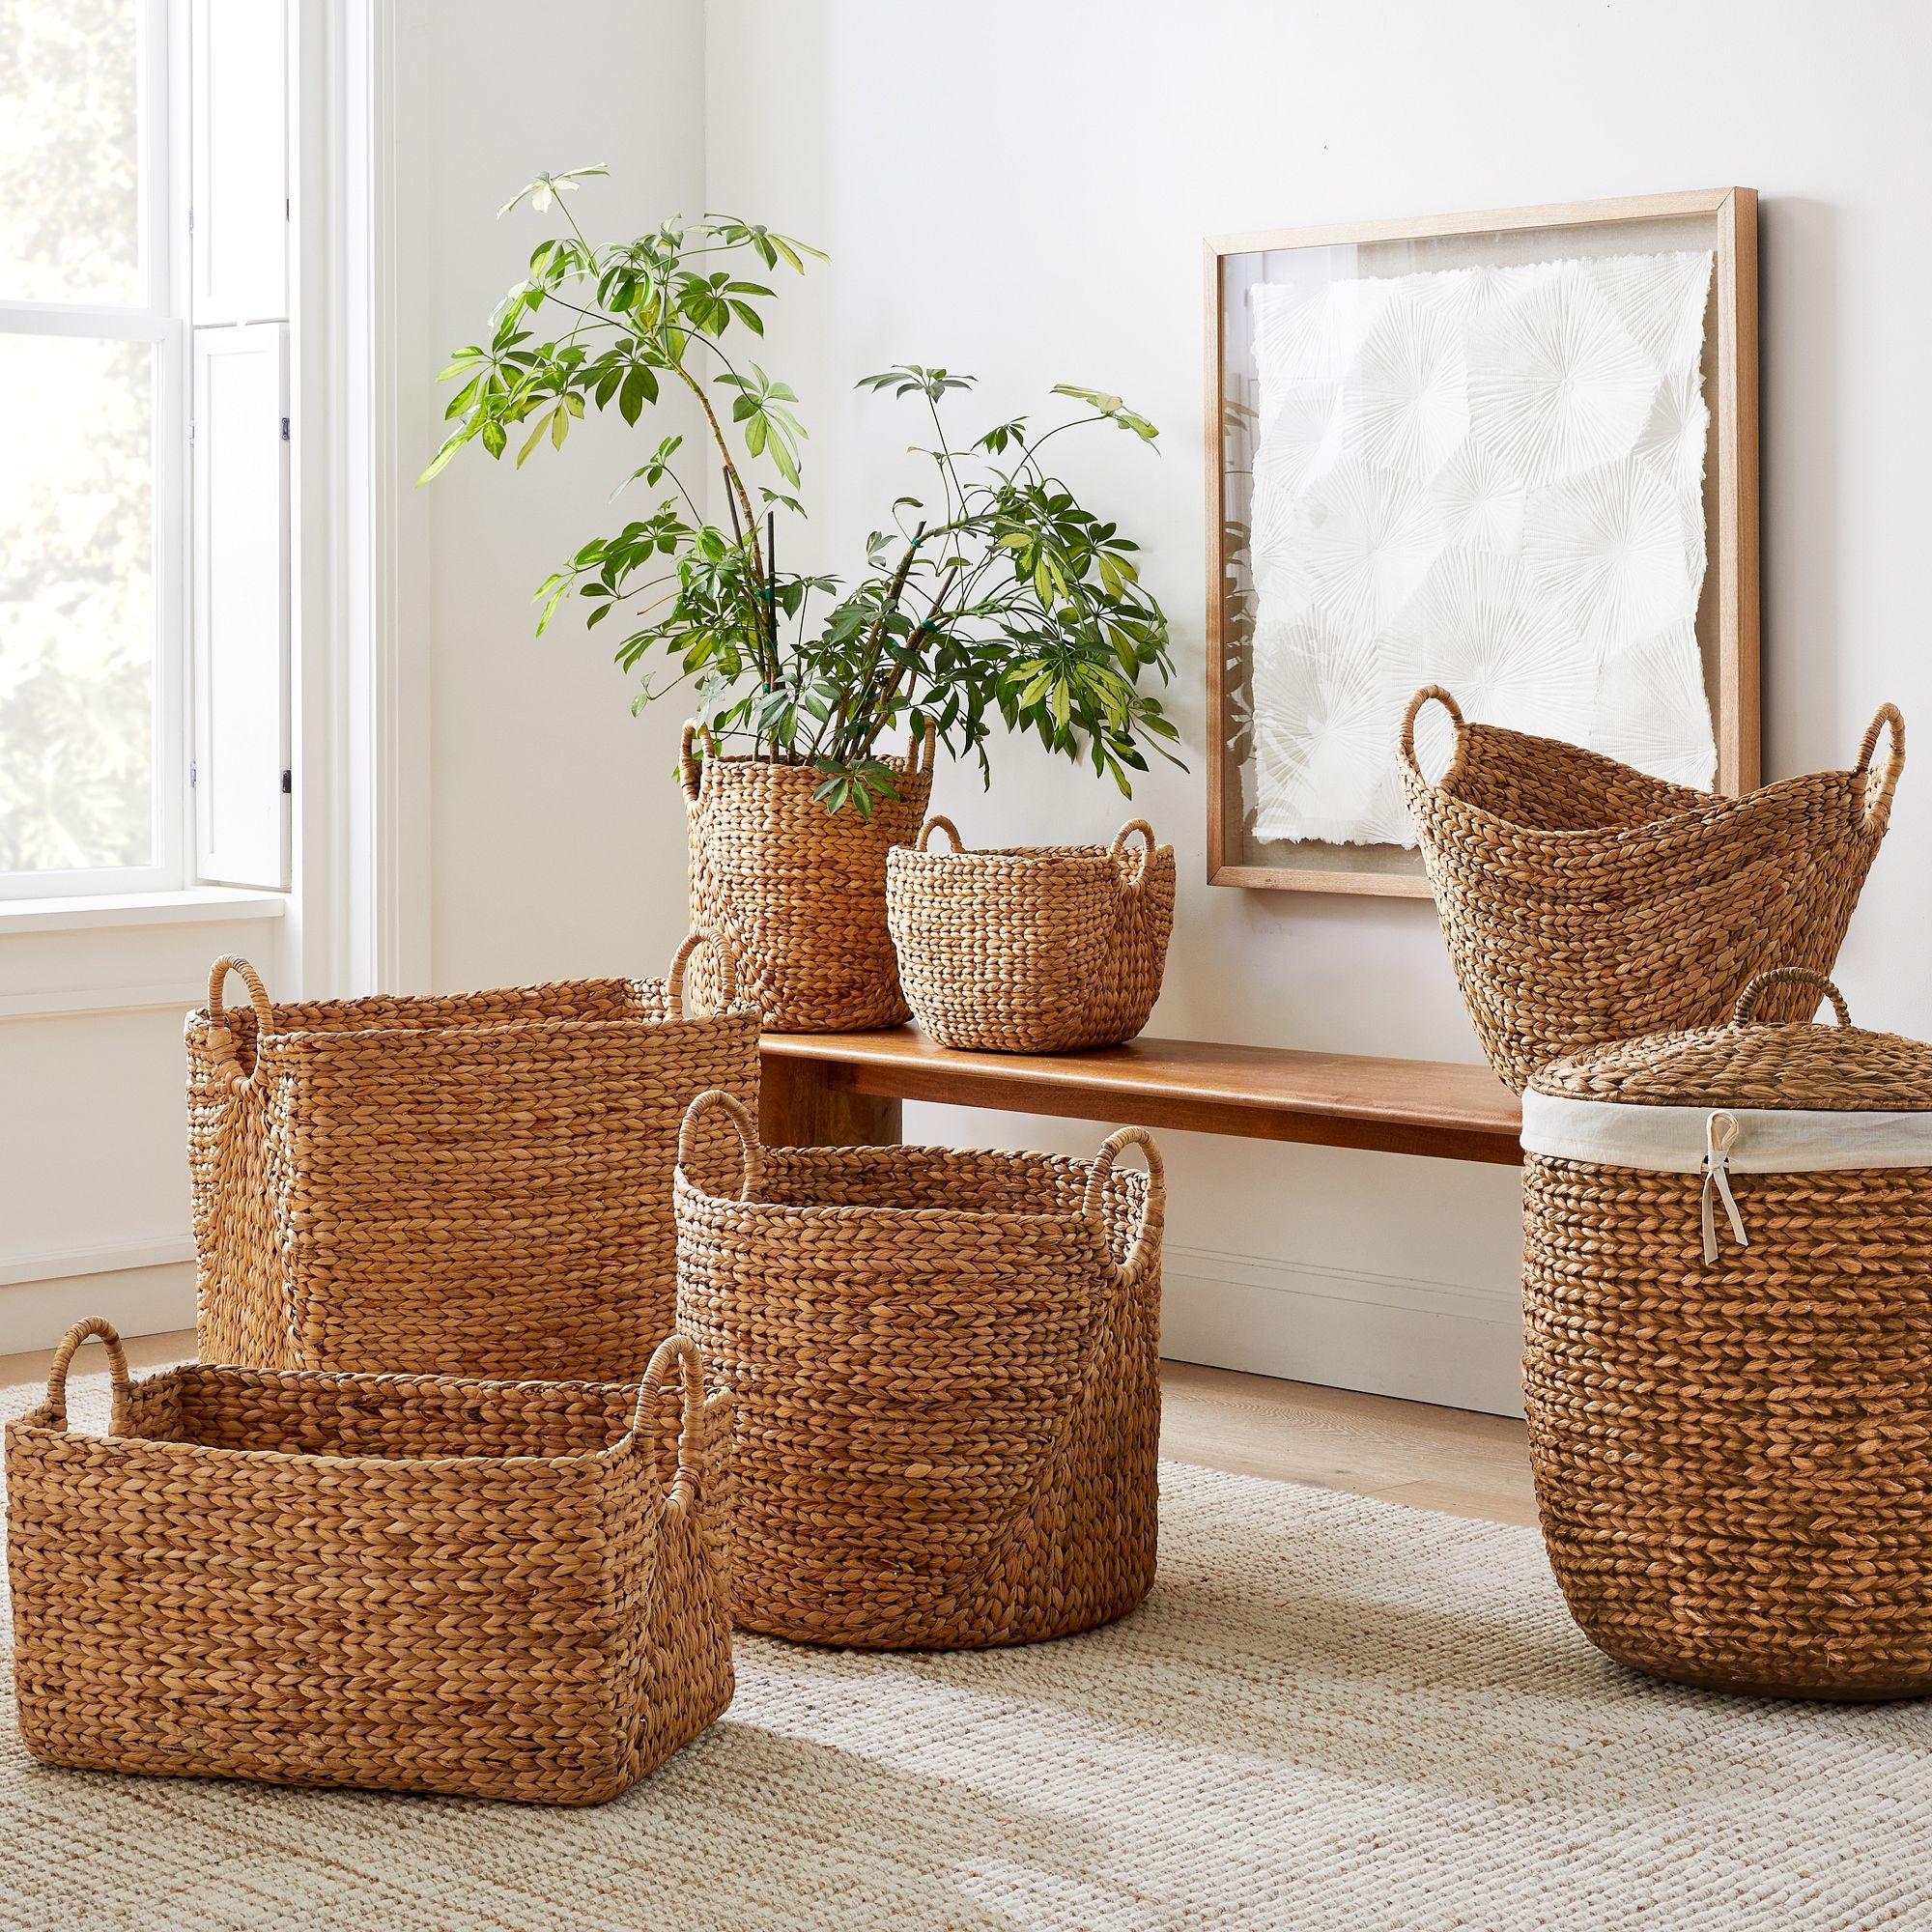 Curved Seagrass Basket, Handle Baskets, Natural, Large, 17.7"W x 21.6"D x 19.3"H - Image 1